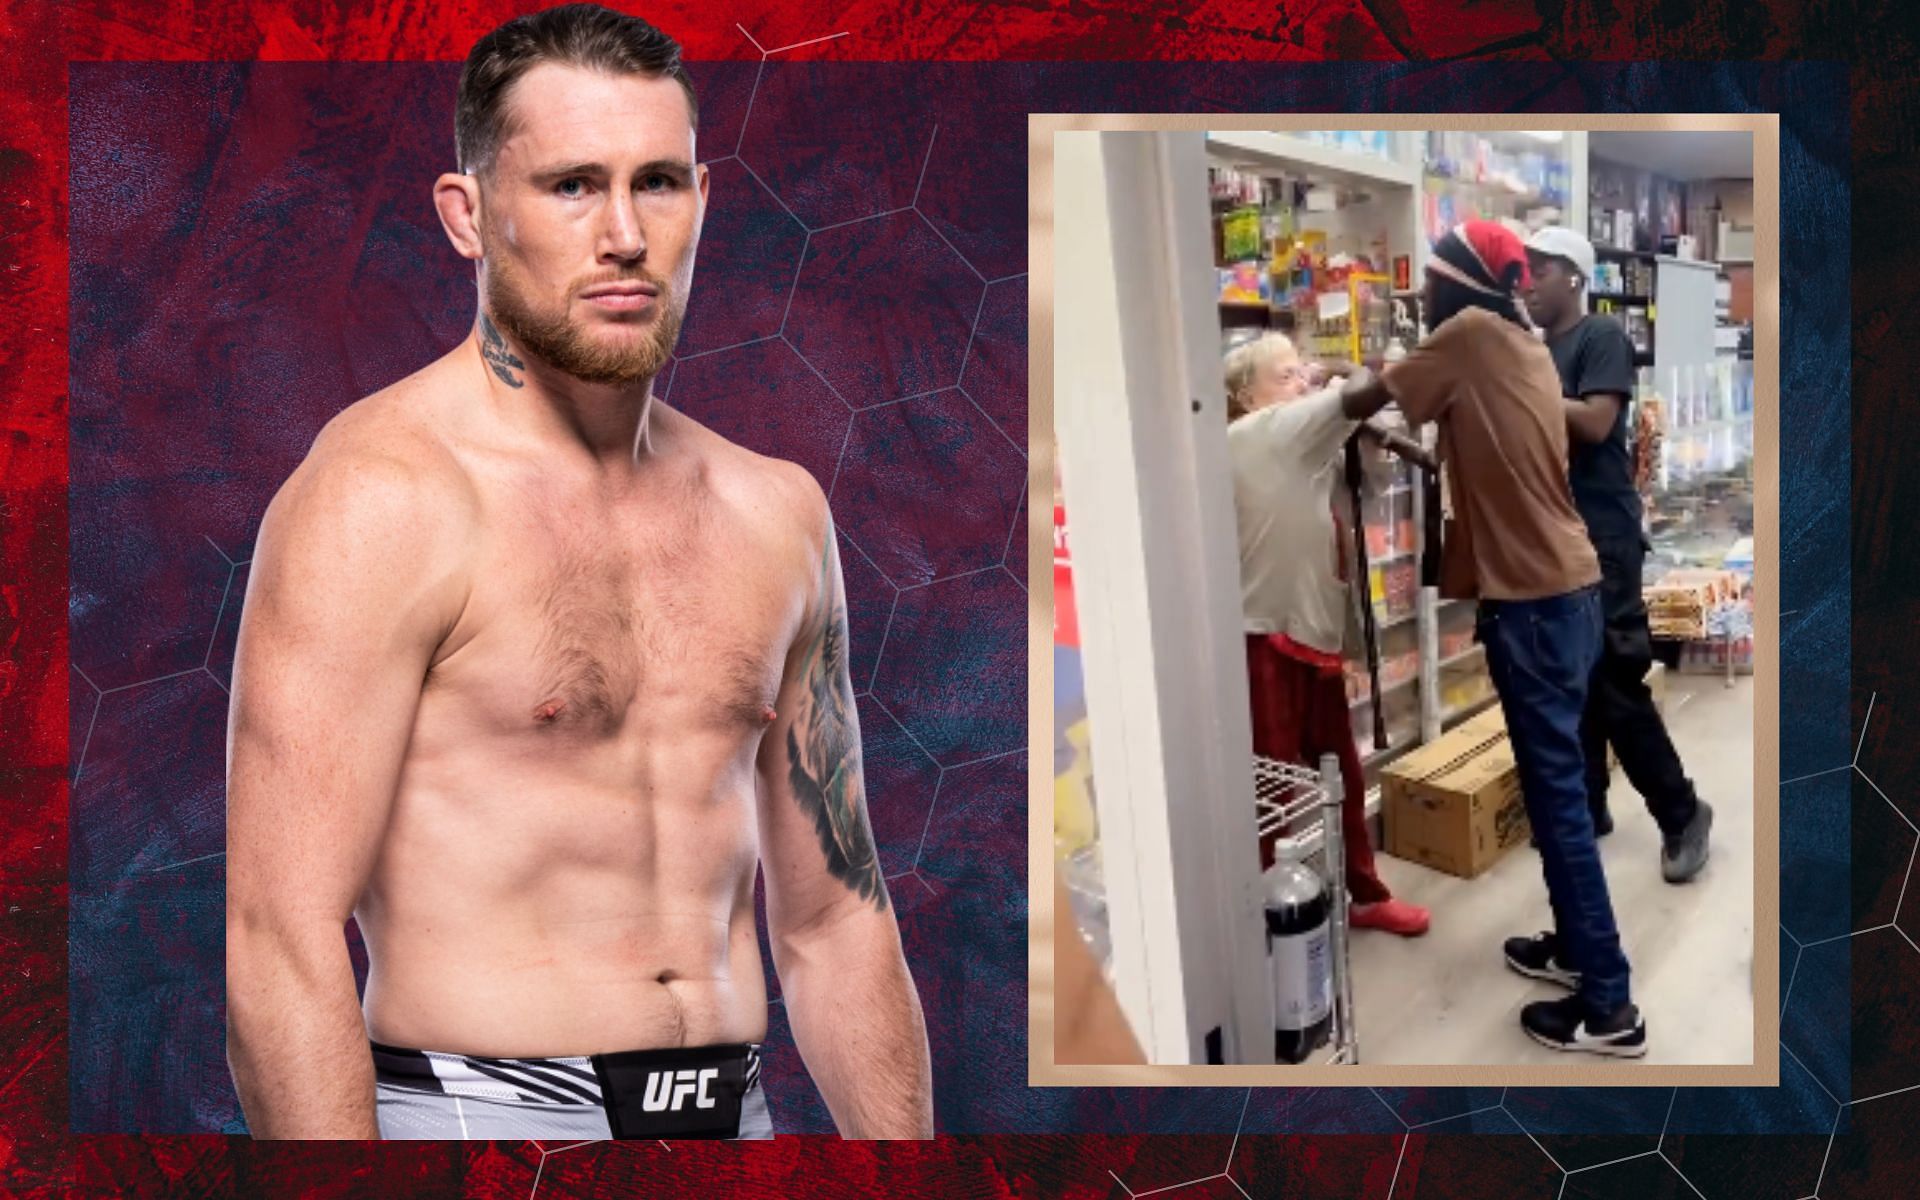 Darren Till reacts to a video of an old woman getting attacked by an individual